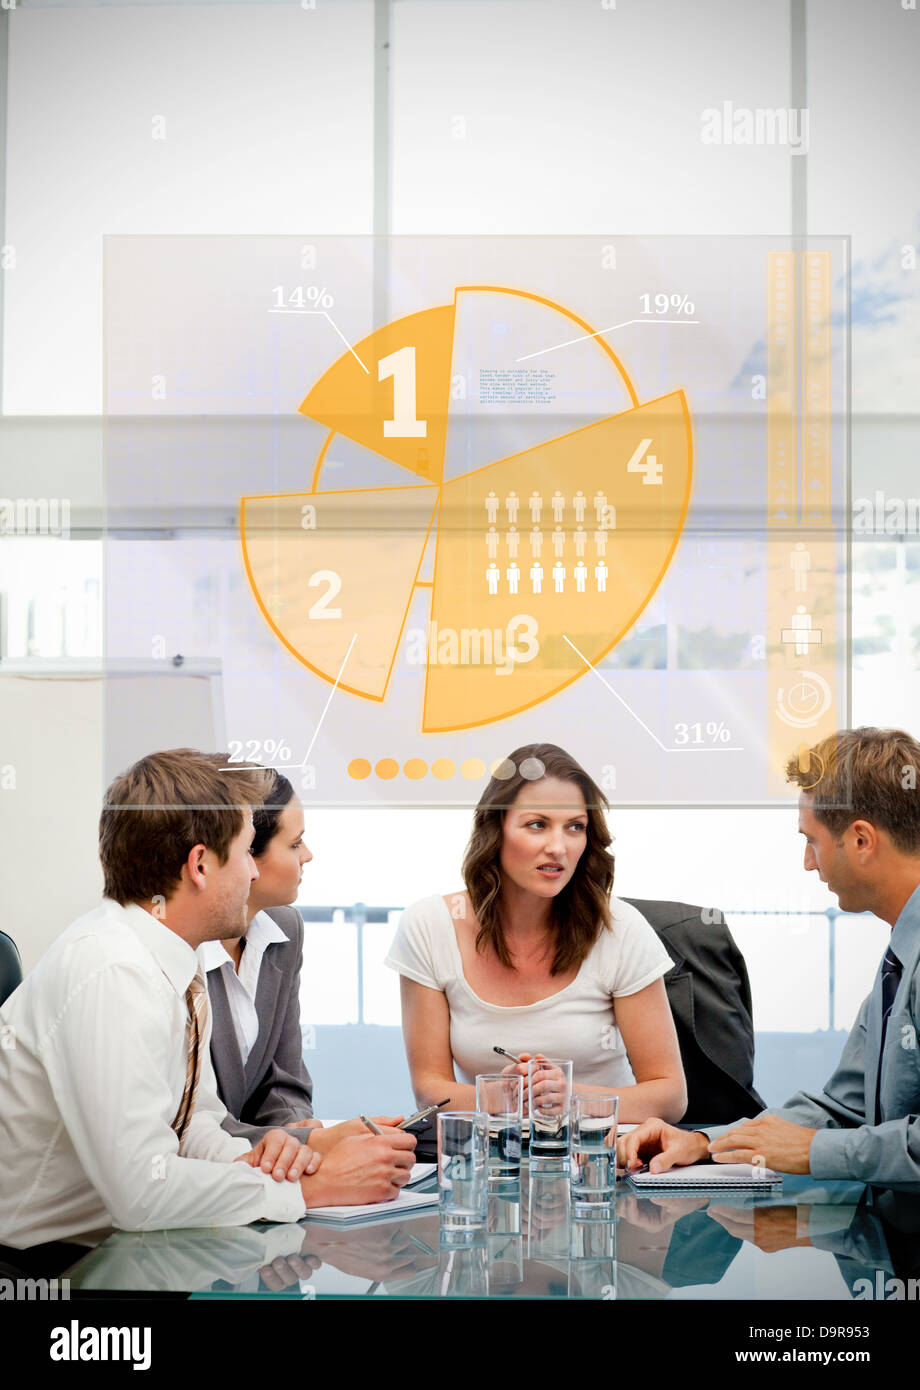 Business workers using yellow pie chart interface Stock Photo